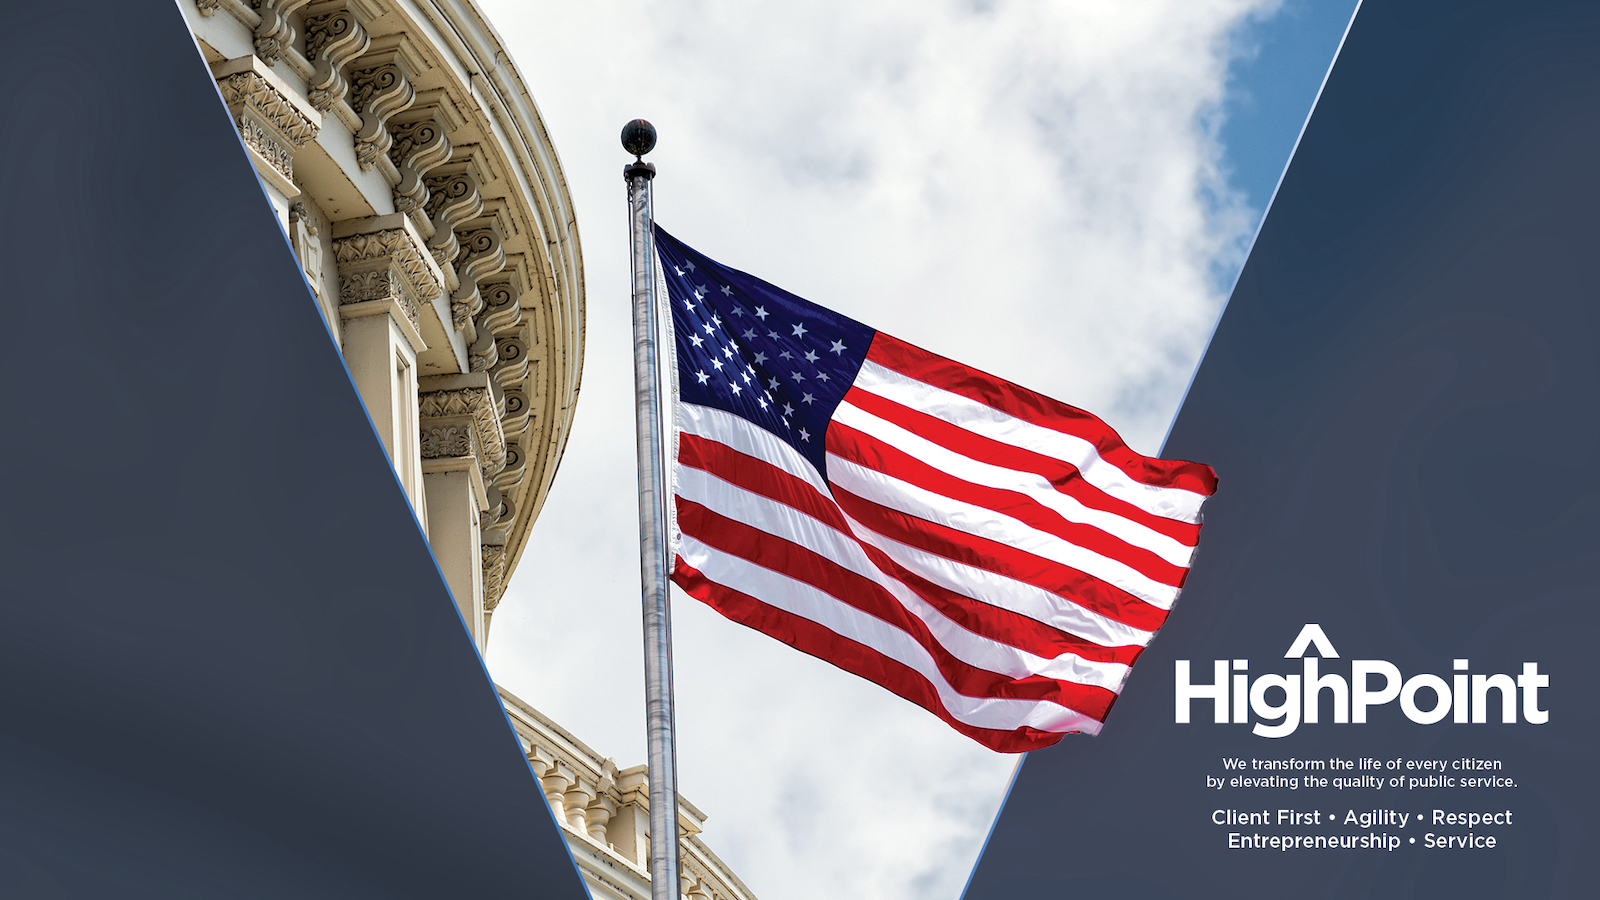 corporate background featuring the capitol building and United States flag